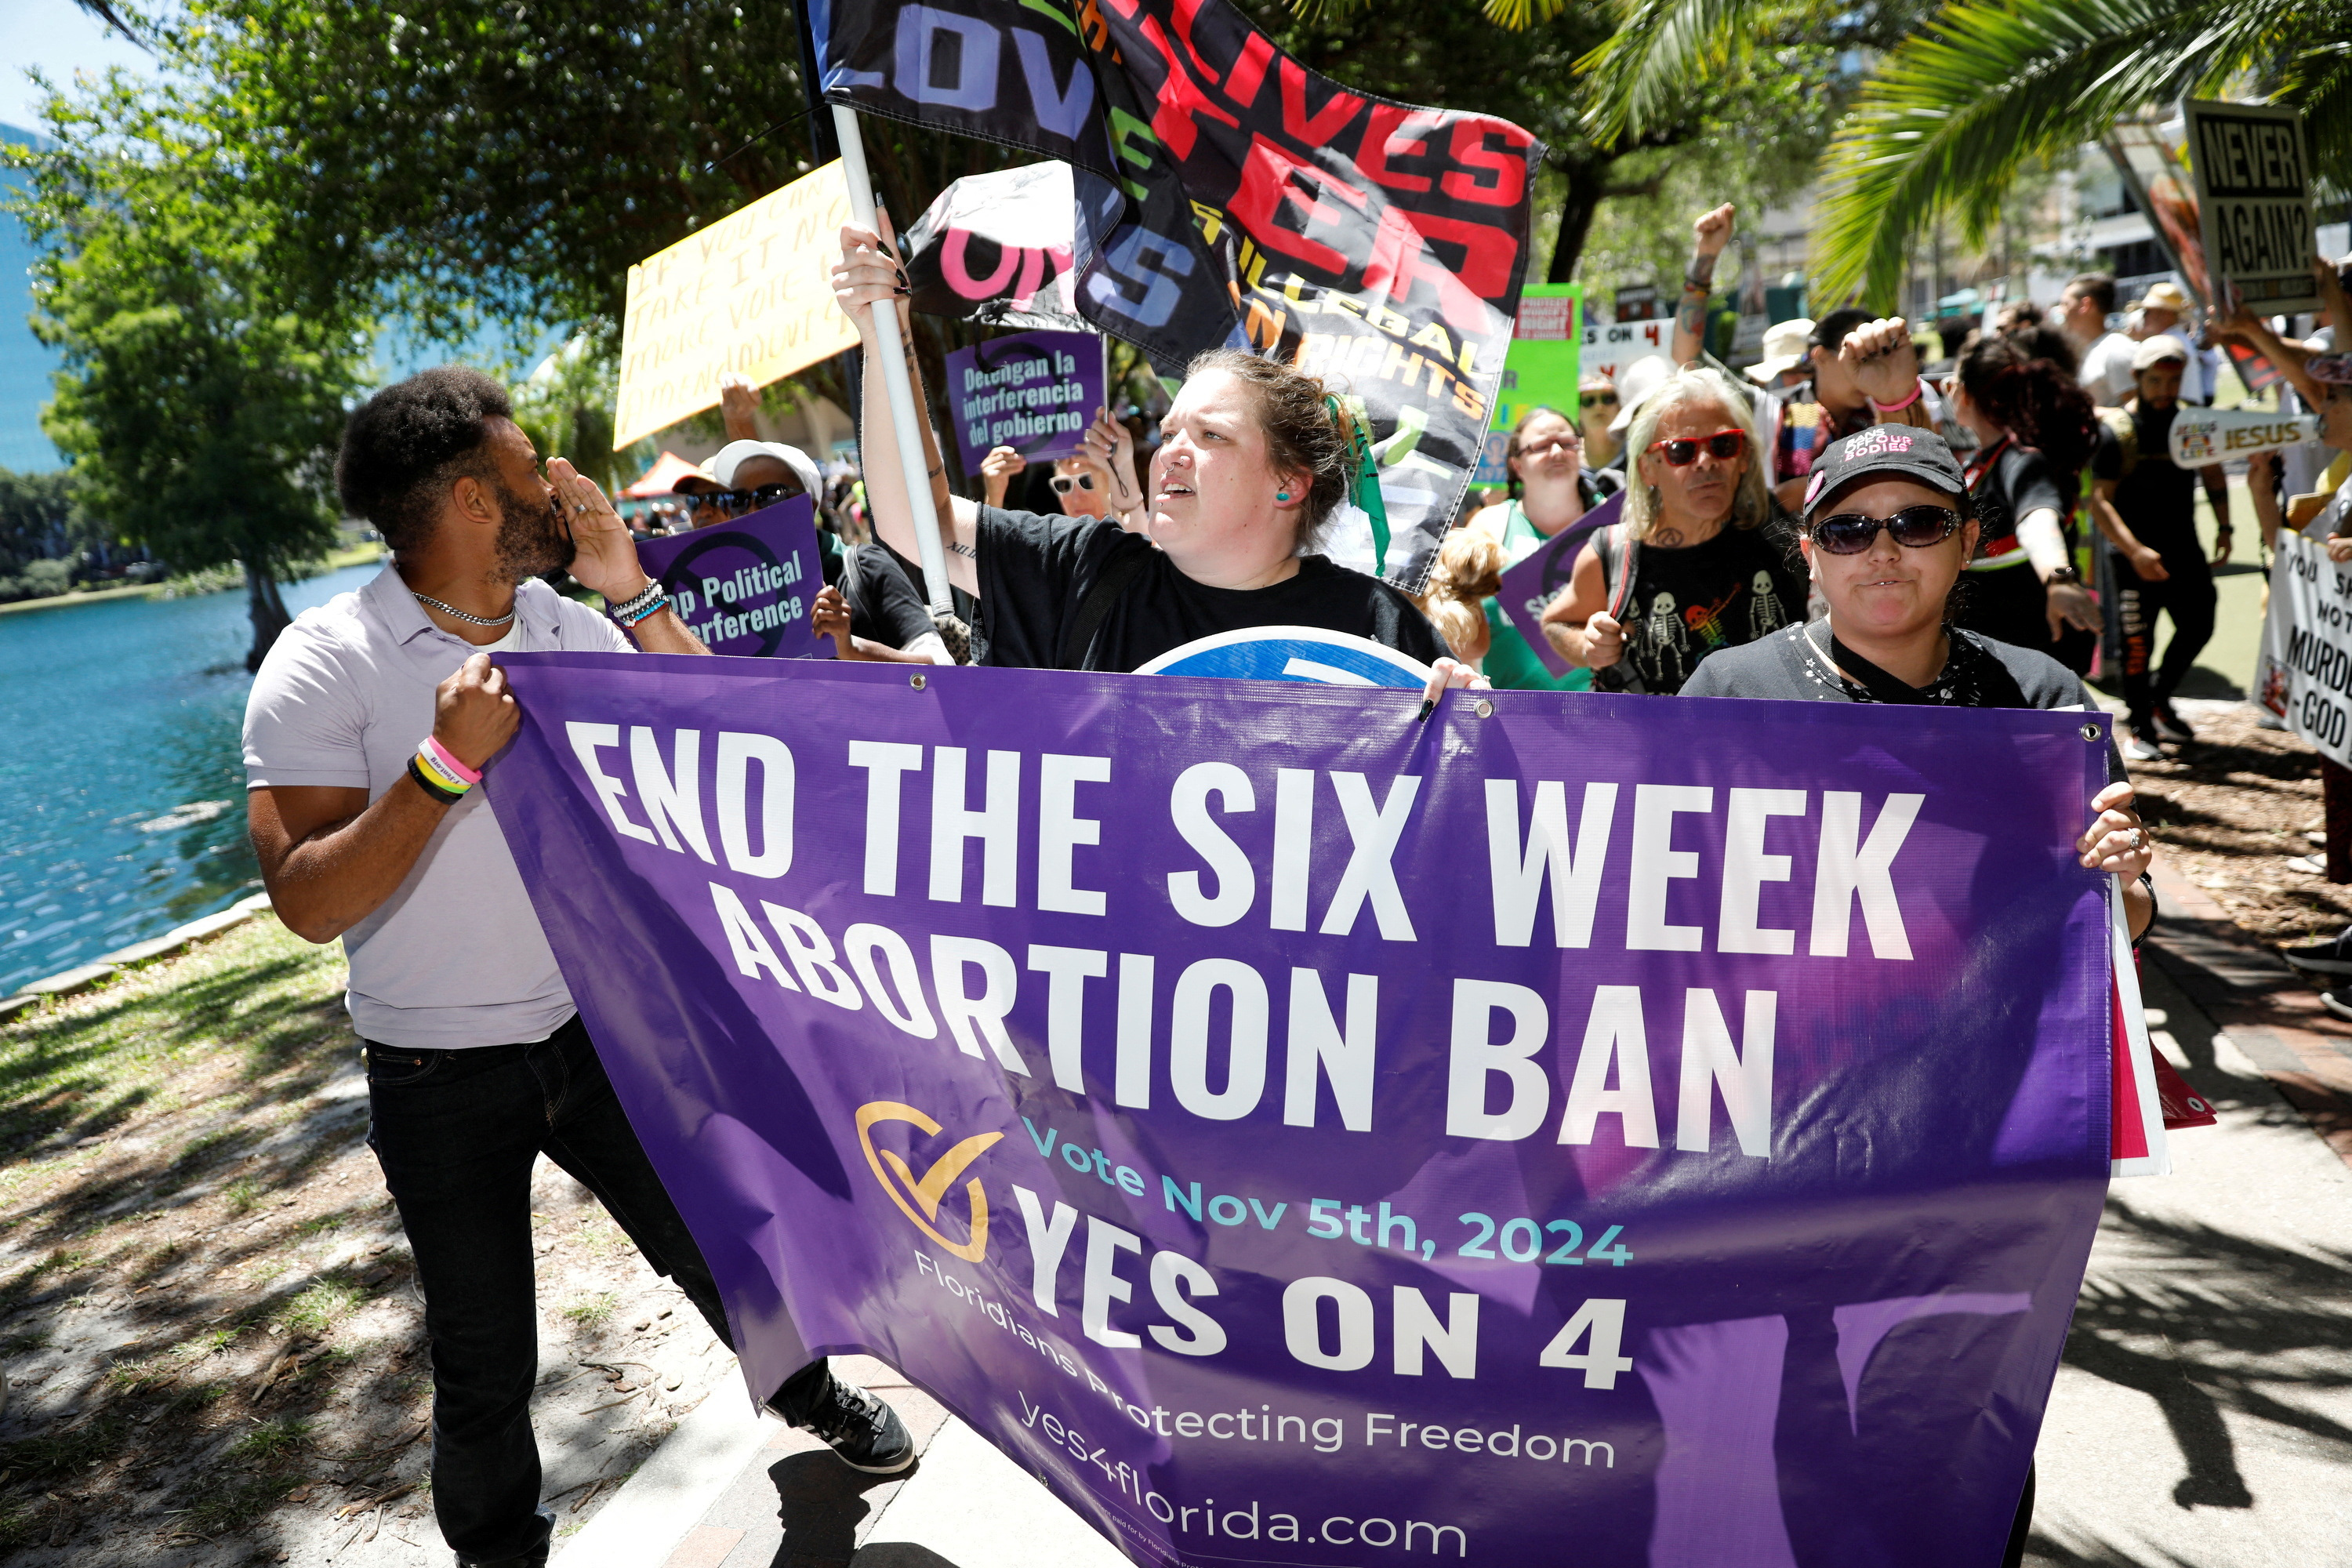 Abortion rights advocates gather to launch their campaign in Orlando